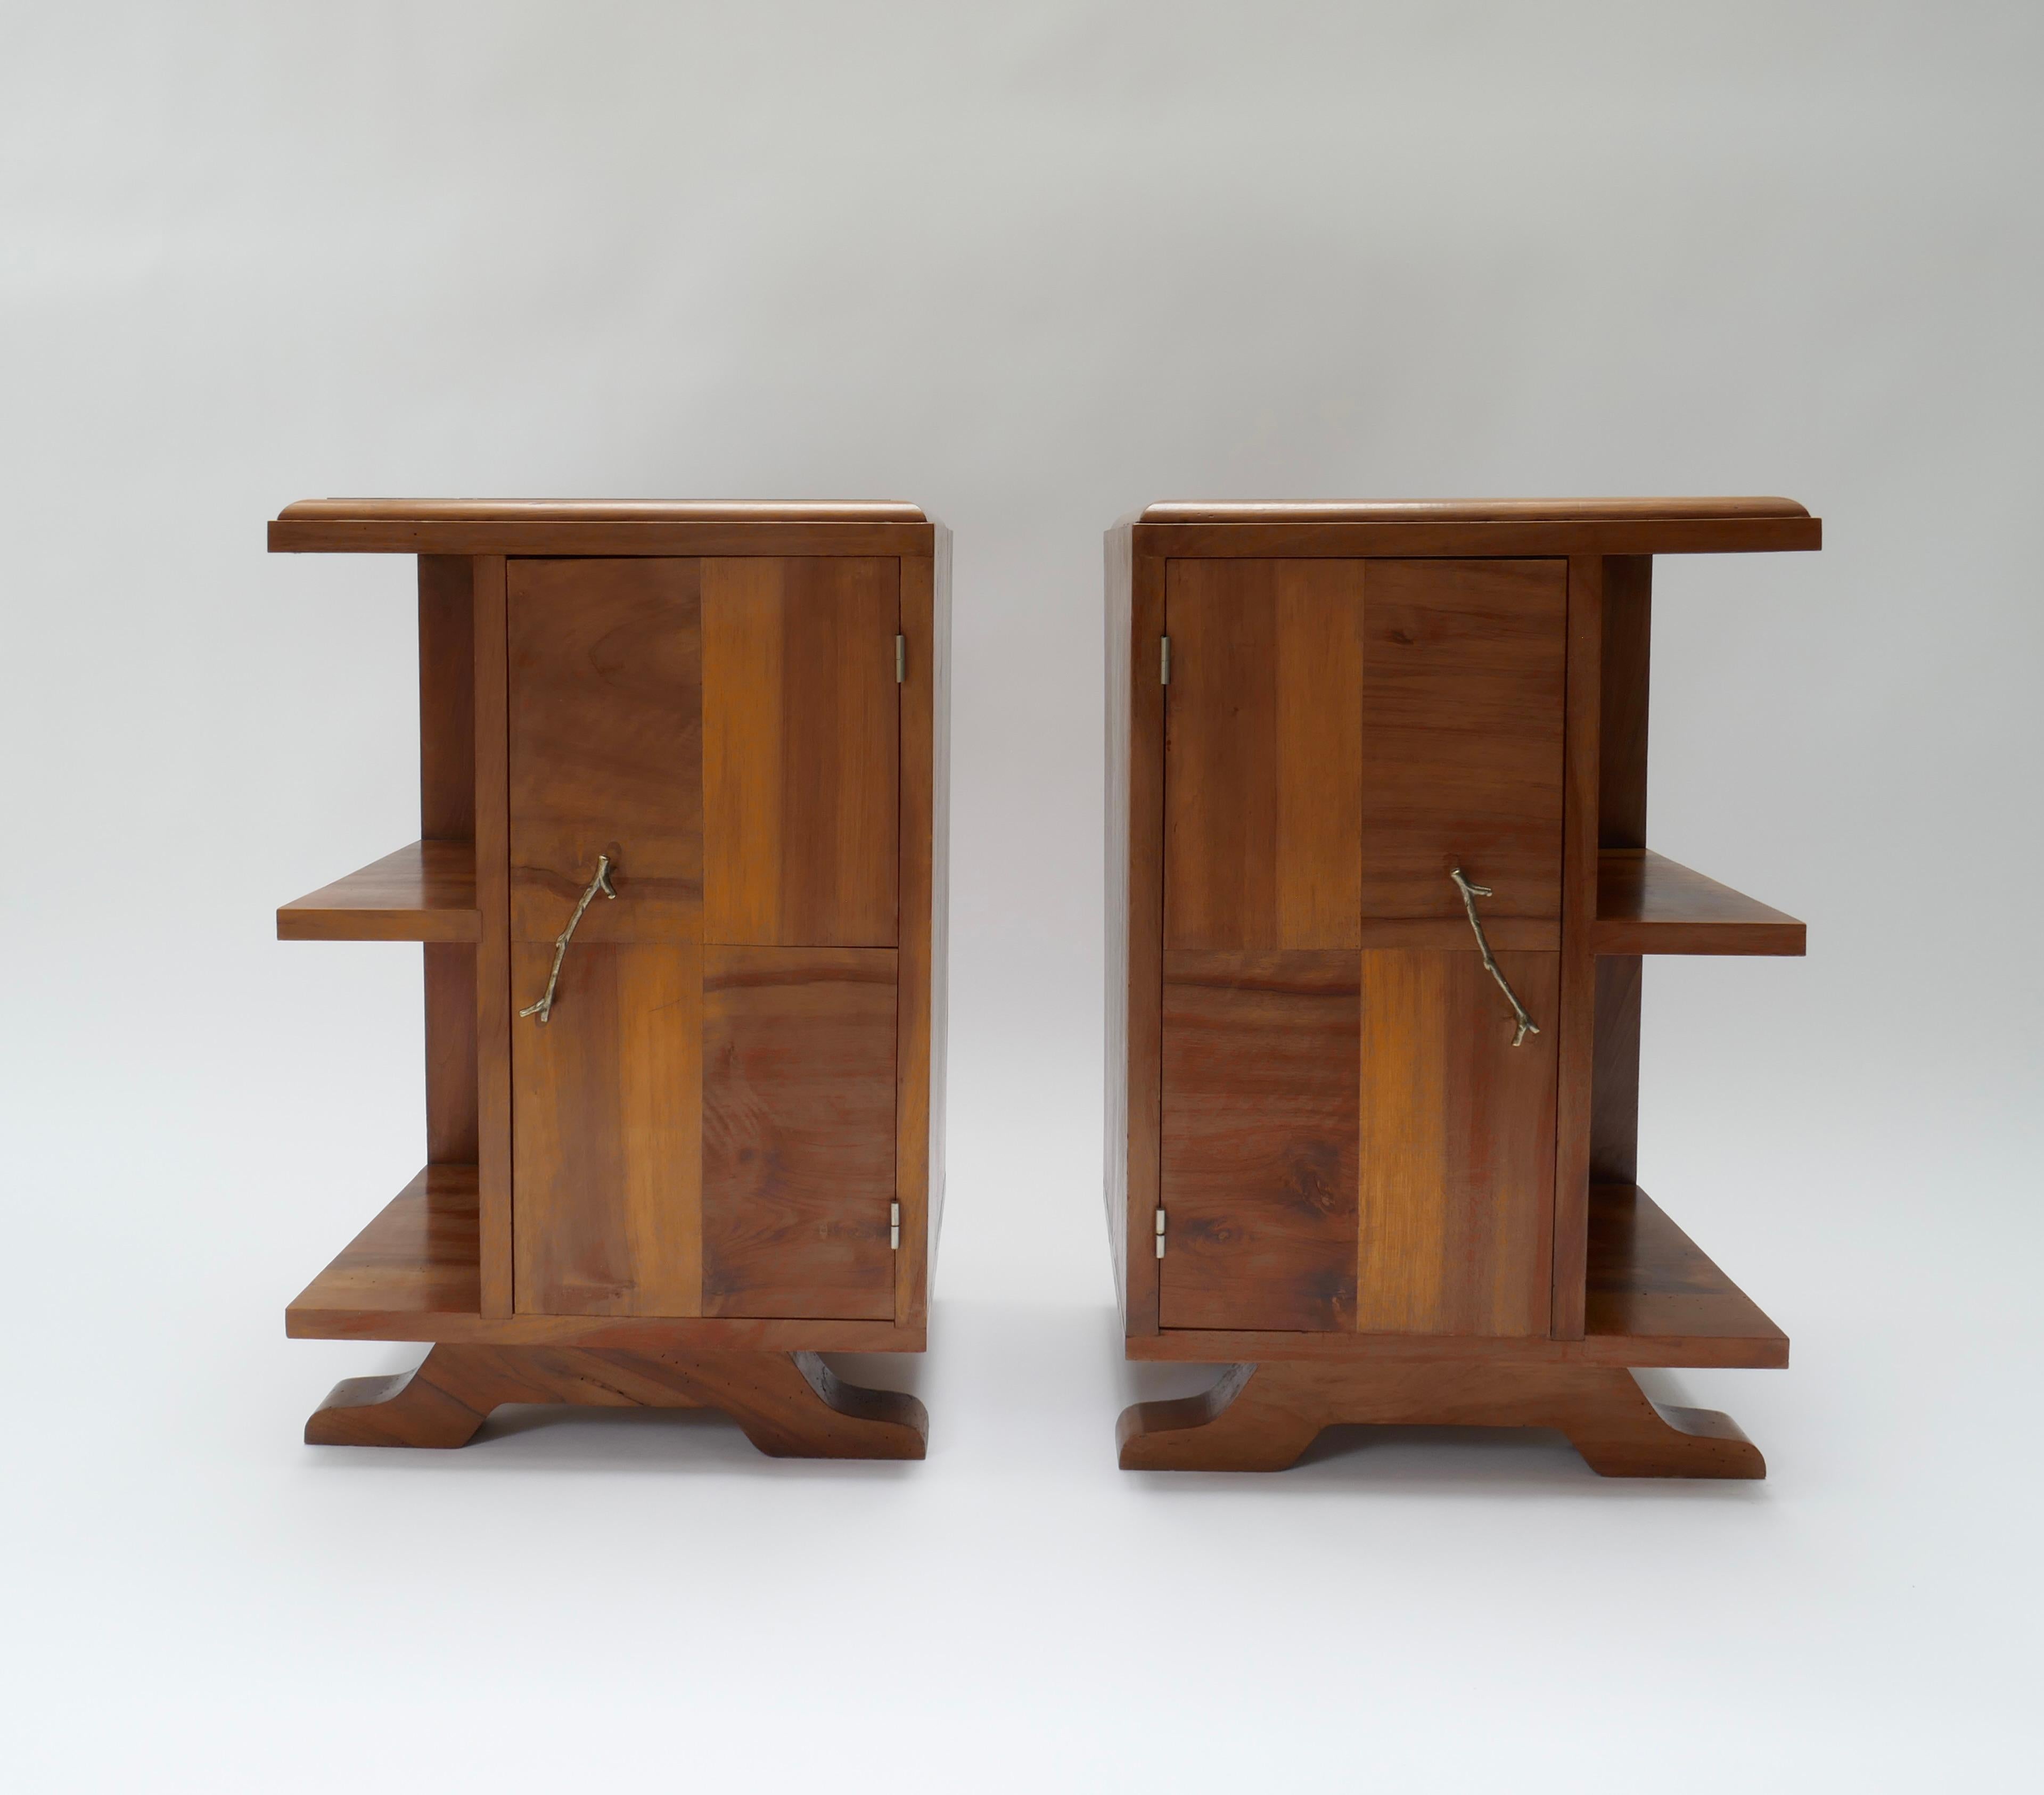 Stunning 1920s figured walnut Art Deco side tables/ nightstands. 
Ideal size for displaying and storage with modern-day use in mind. Very generous-sized storage in a compact piece. Mid to light tone blonde walnut veneers. We've changed the handles